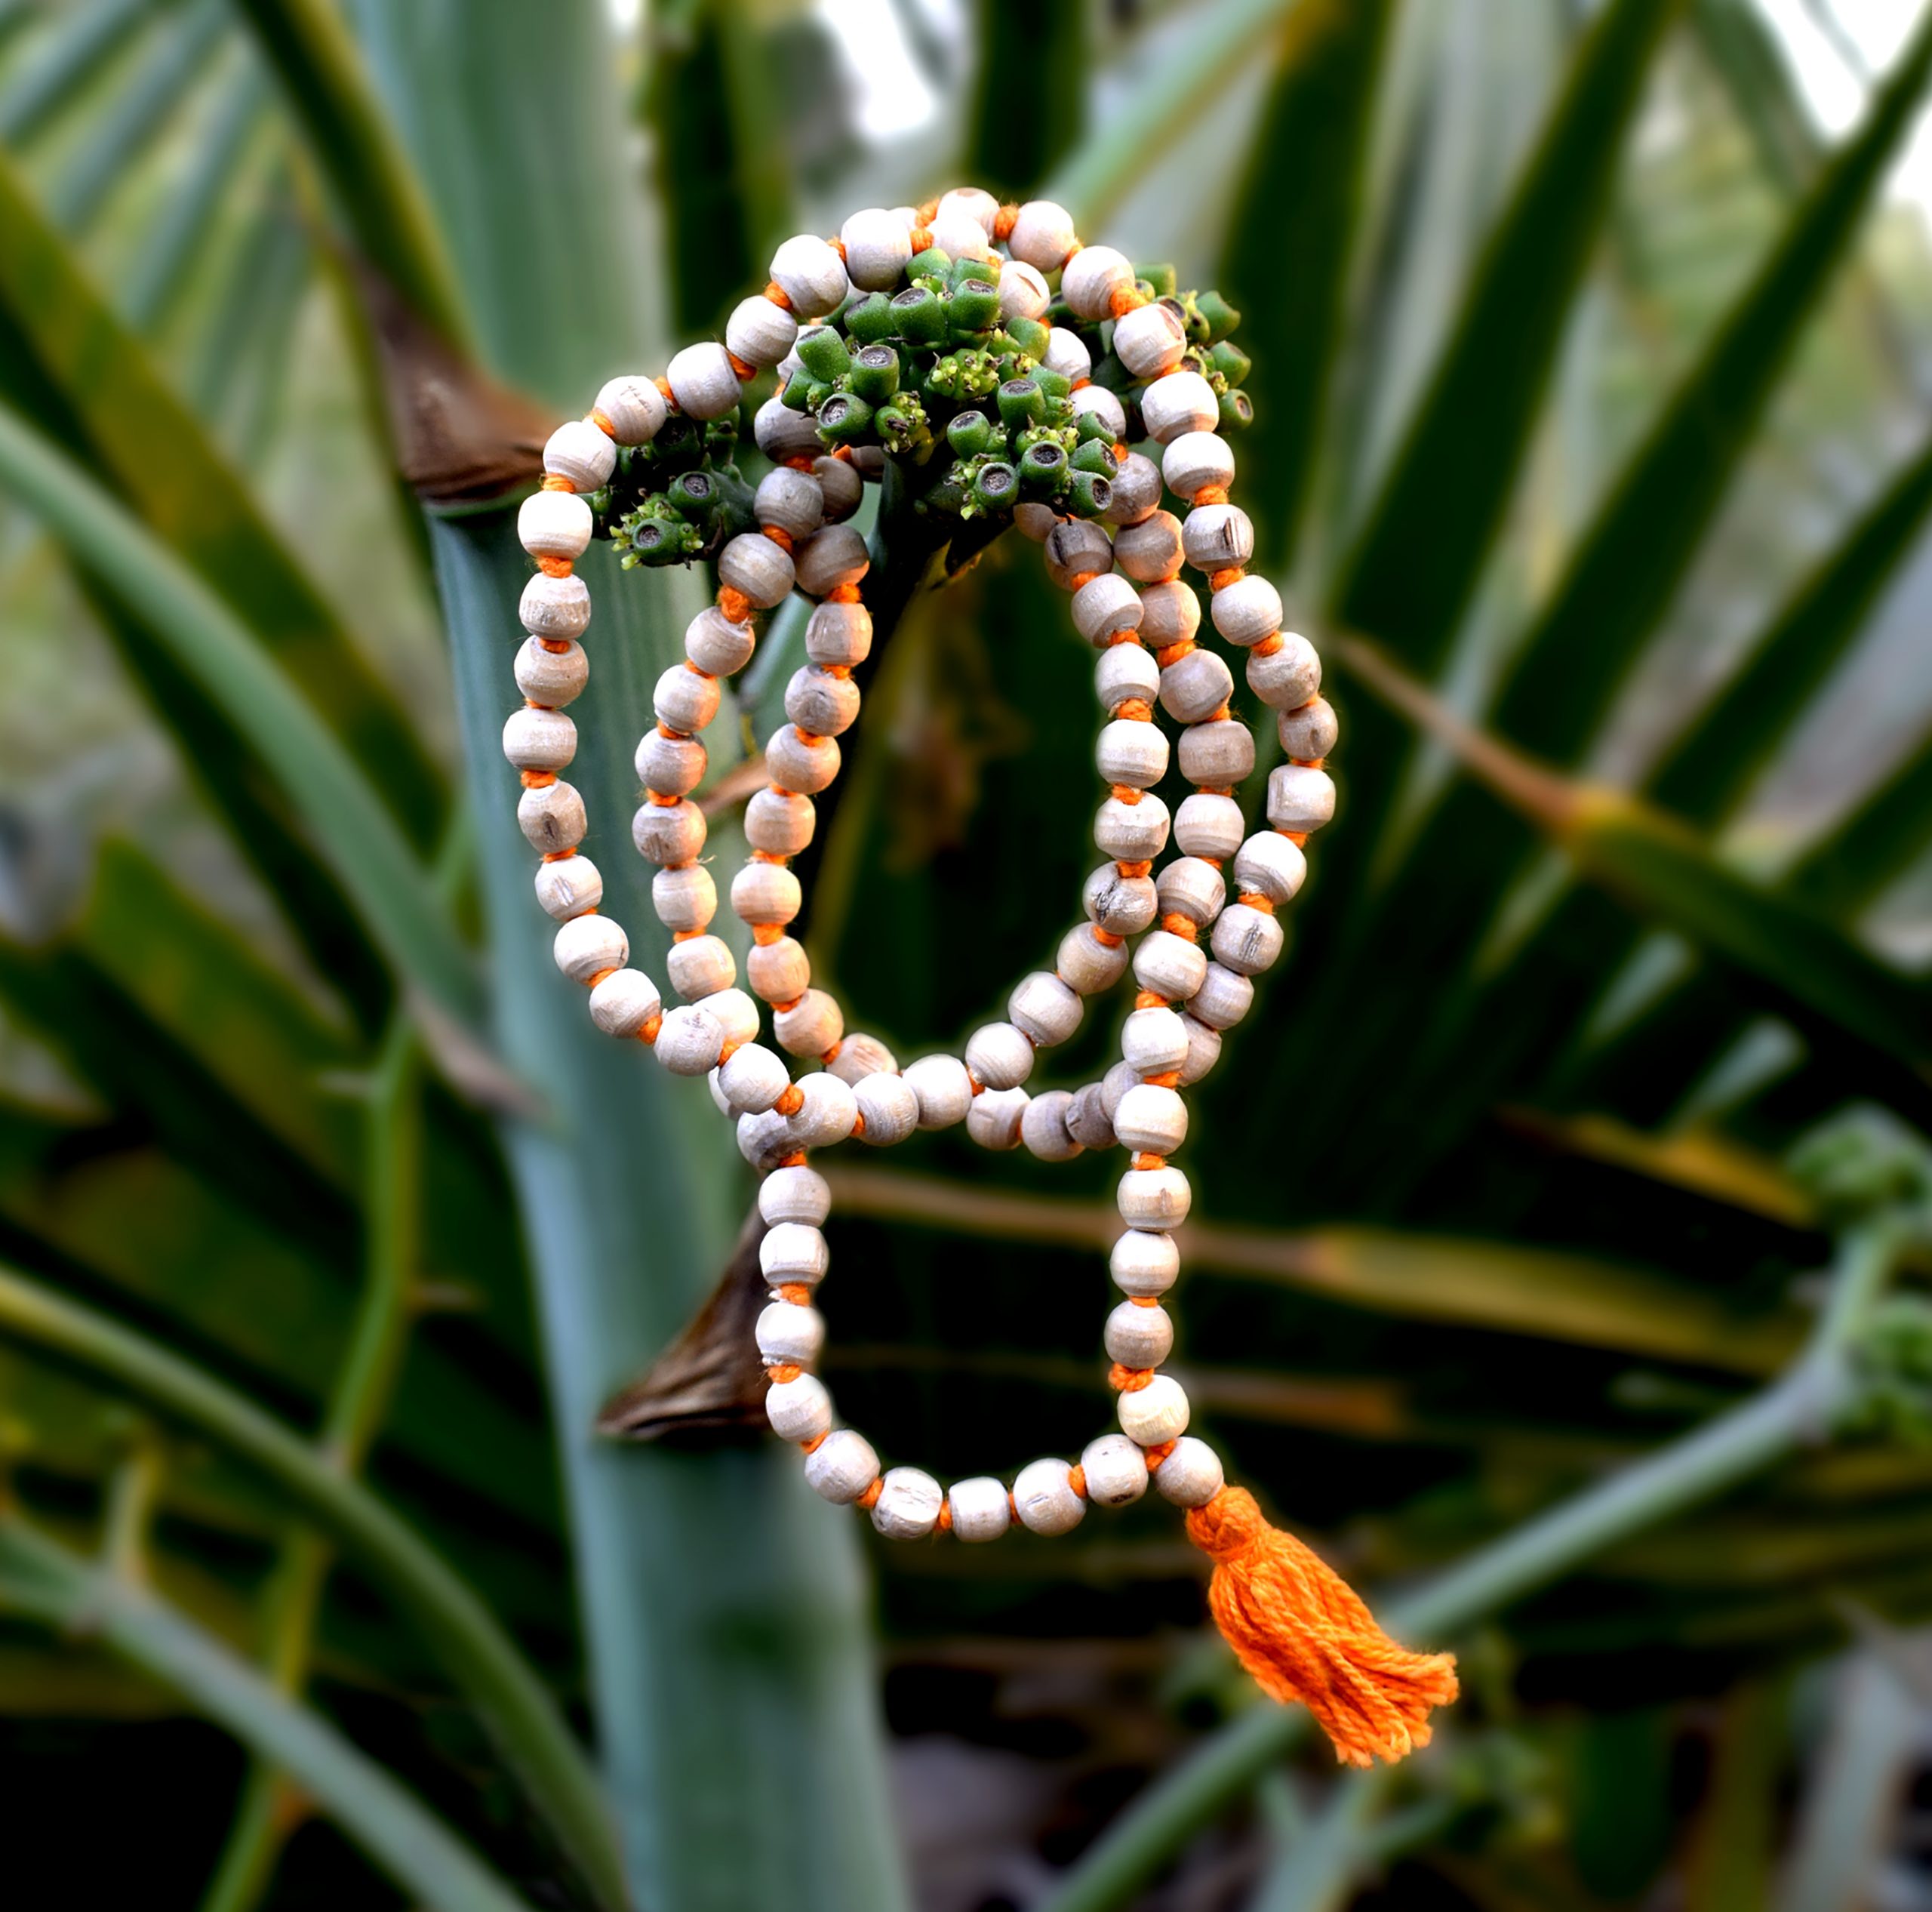 It is a product image of the original tulsi mala that has 108 beads garland made up of tulsi leaves hanging on branches of the tree by the Prabhu Bhakti portal.